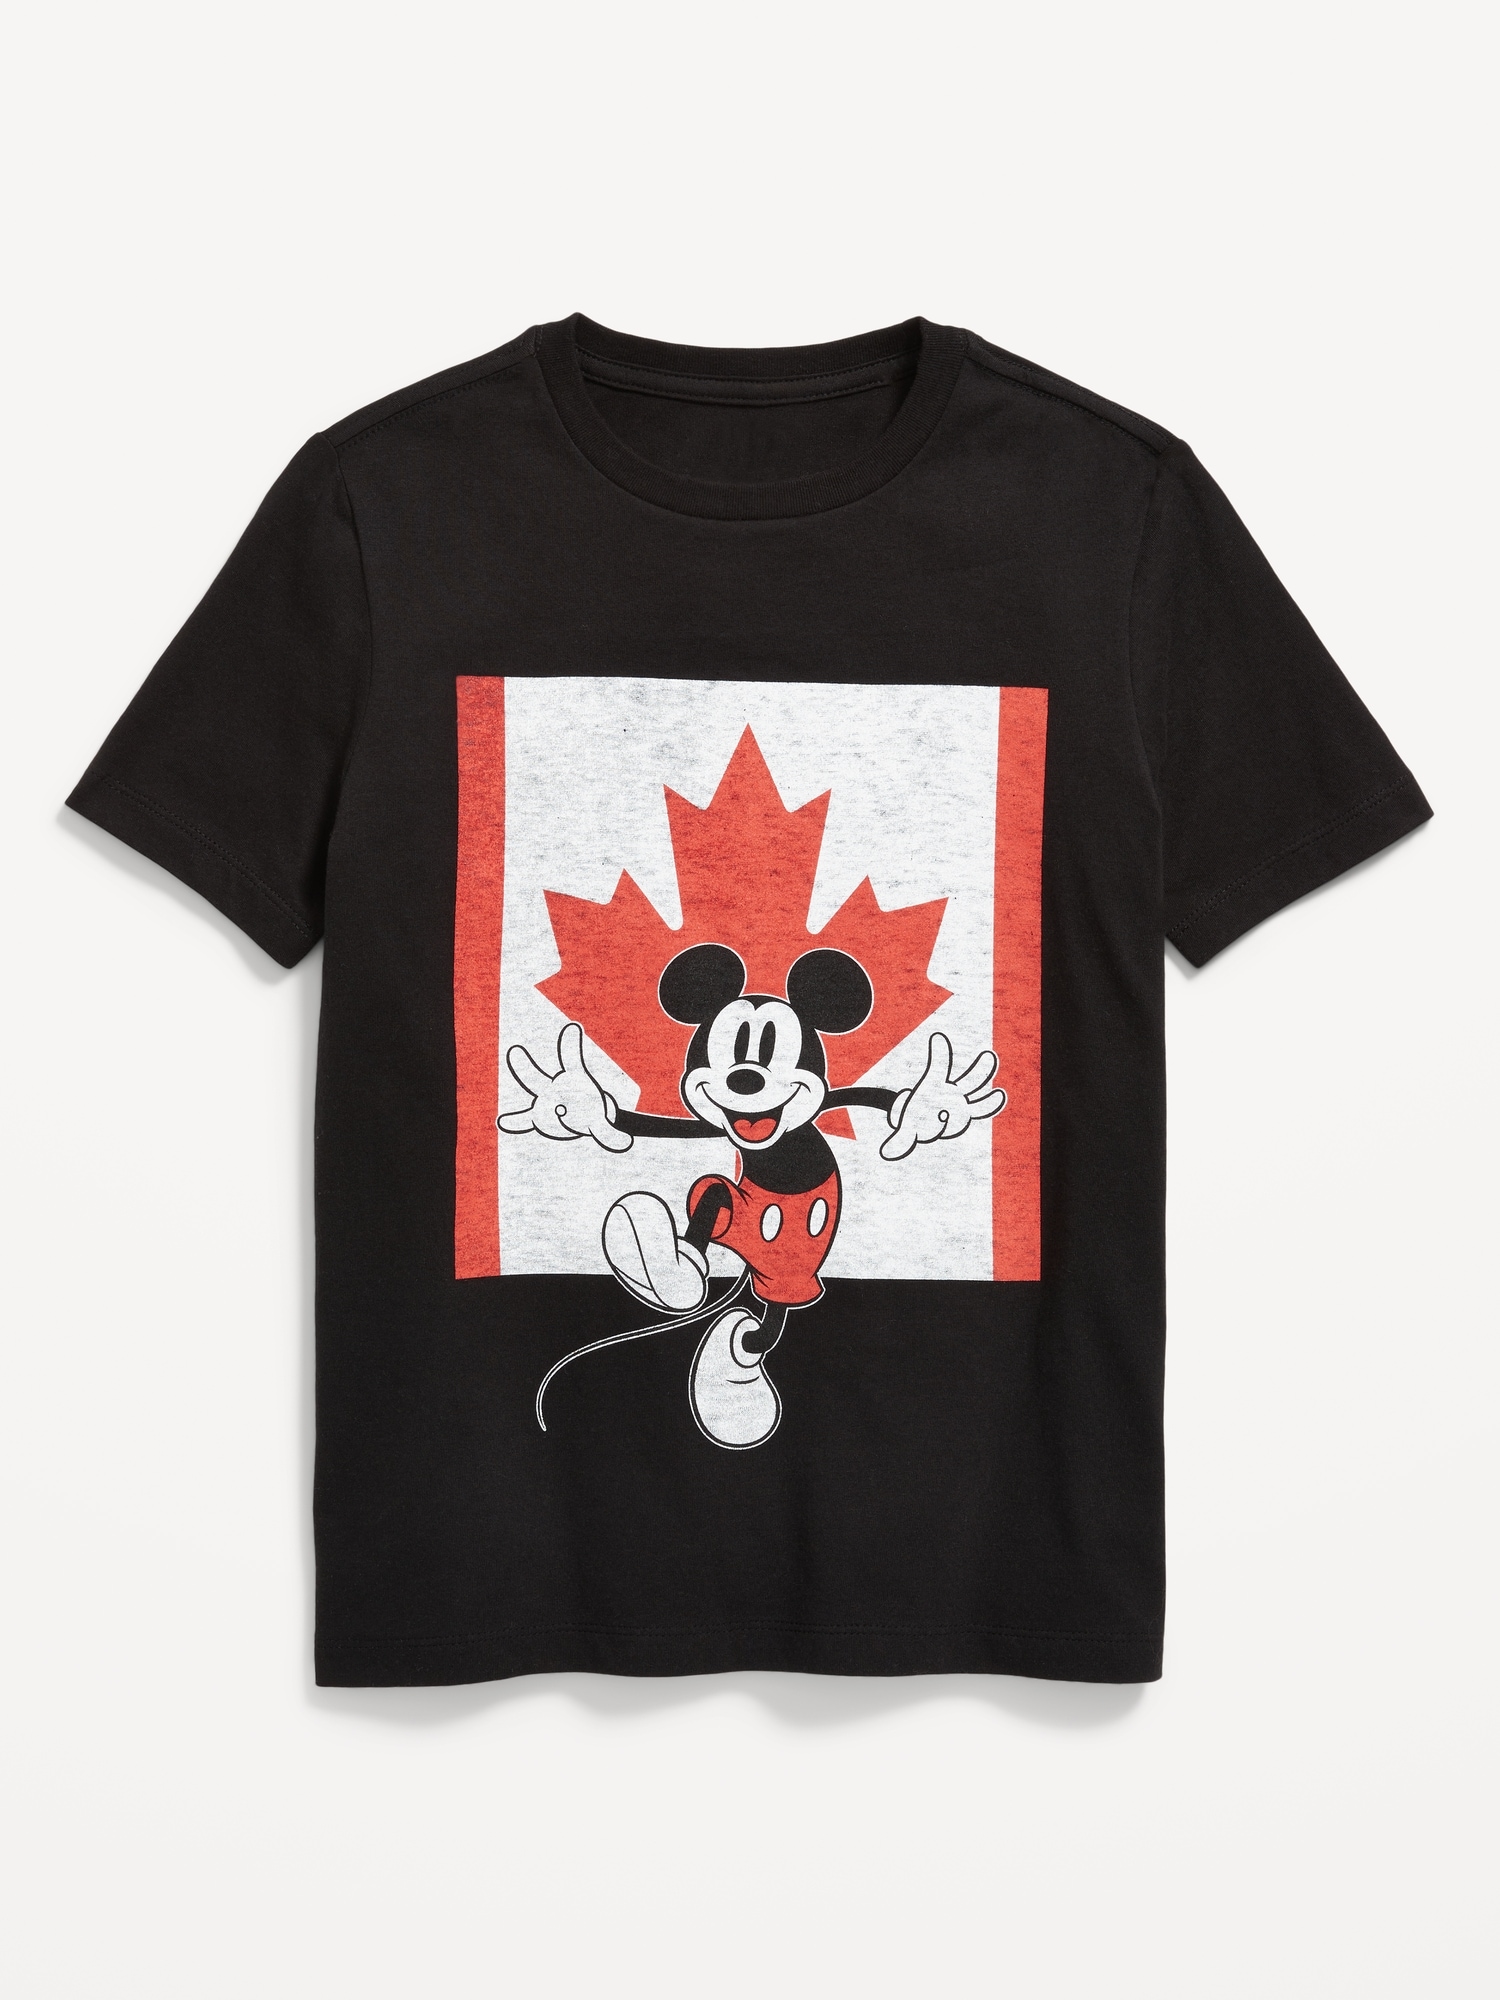 Disney© Mickey Mouse Gender-Neutral Graphic T-Shirt for Kids